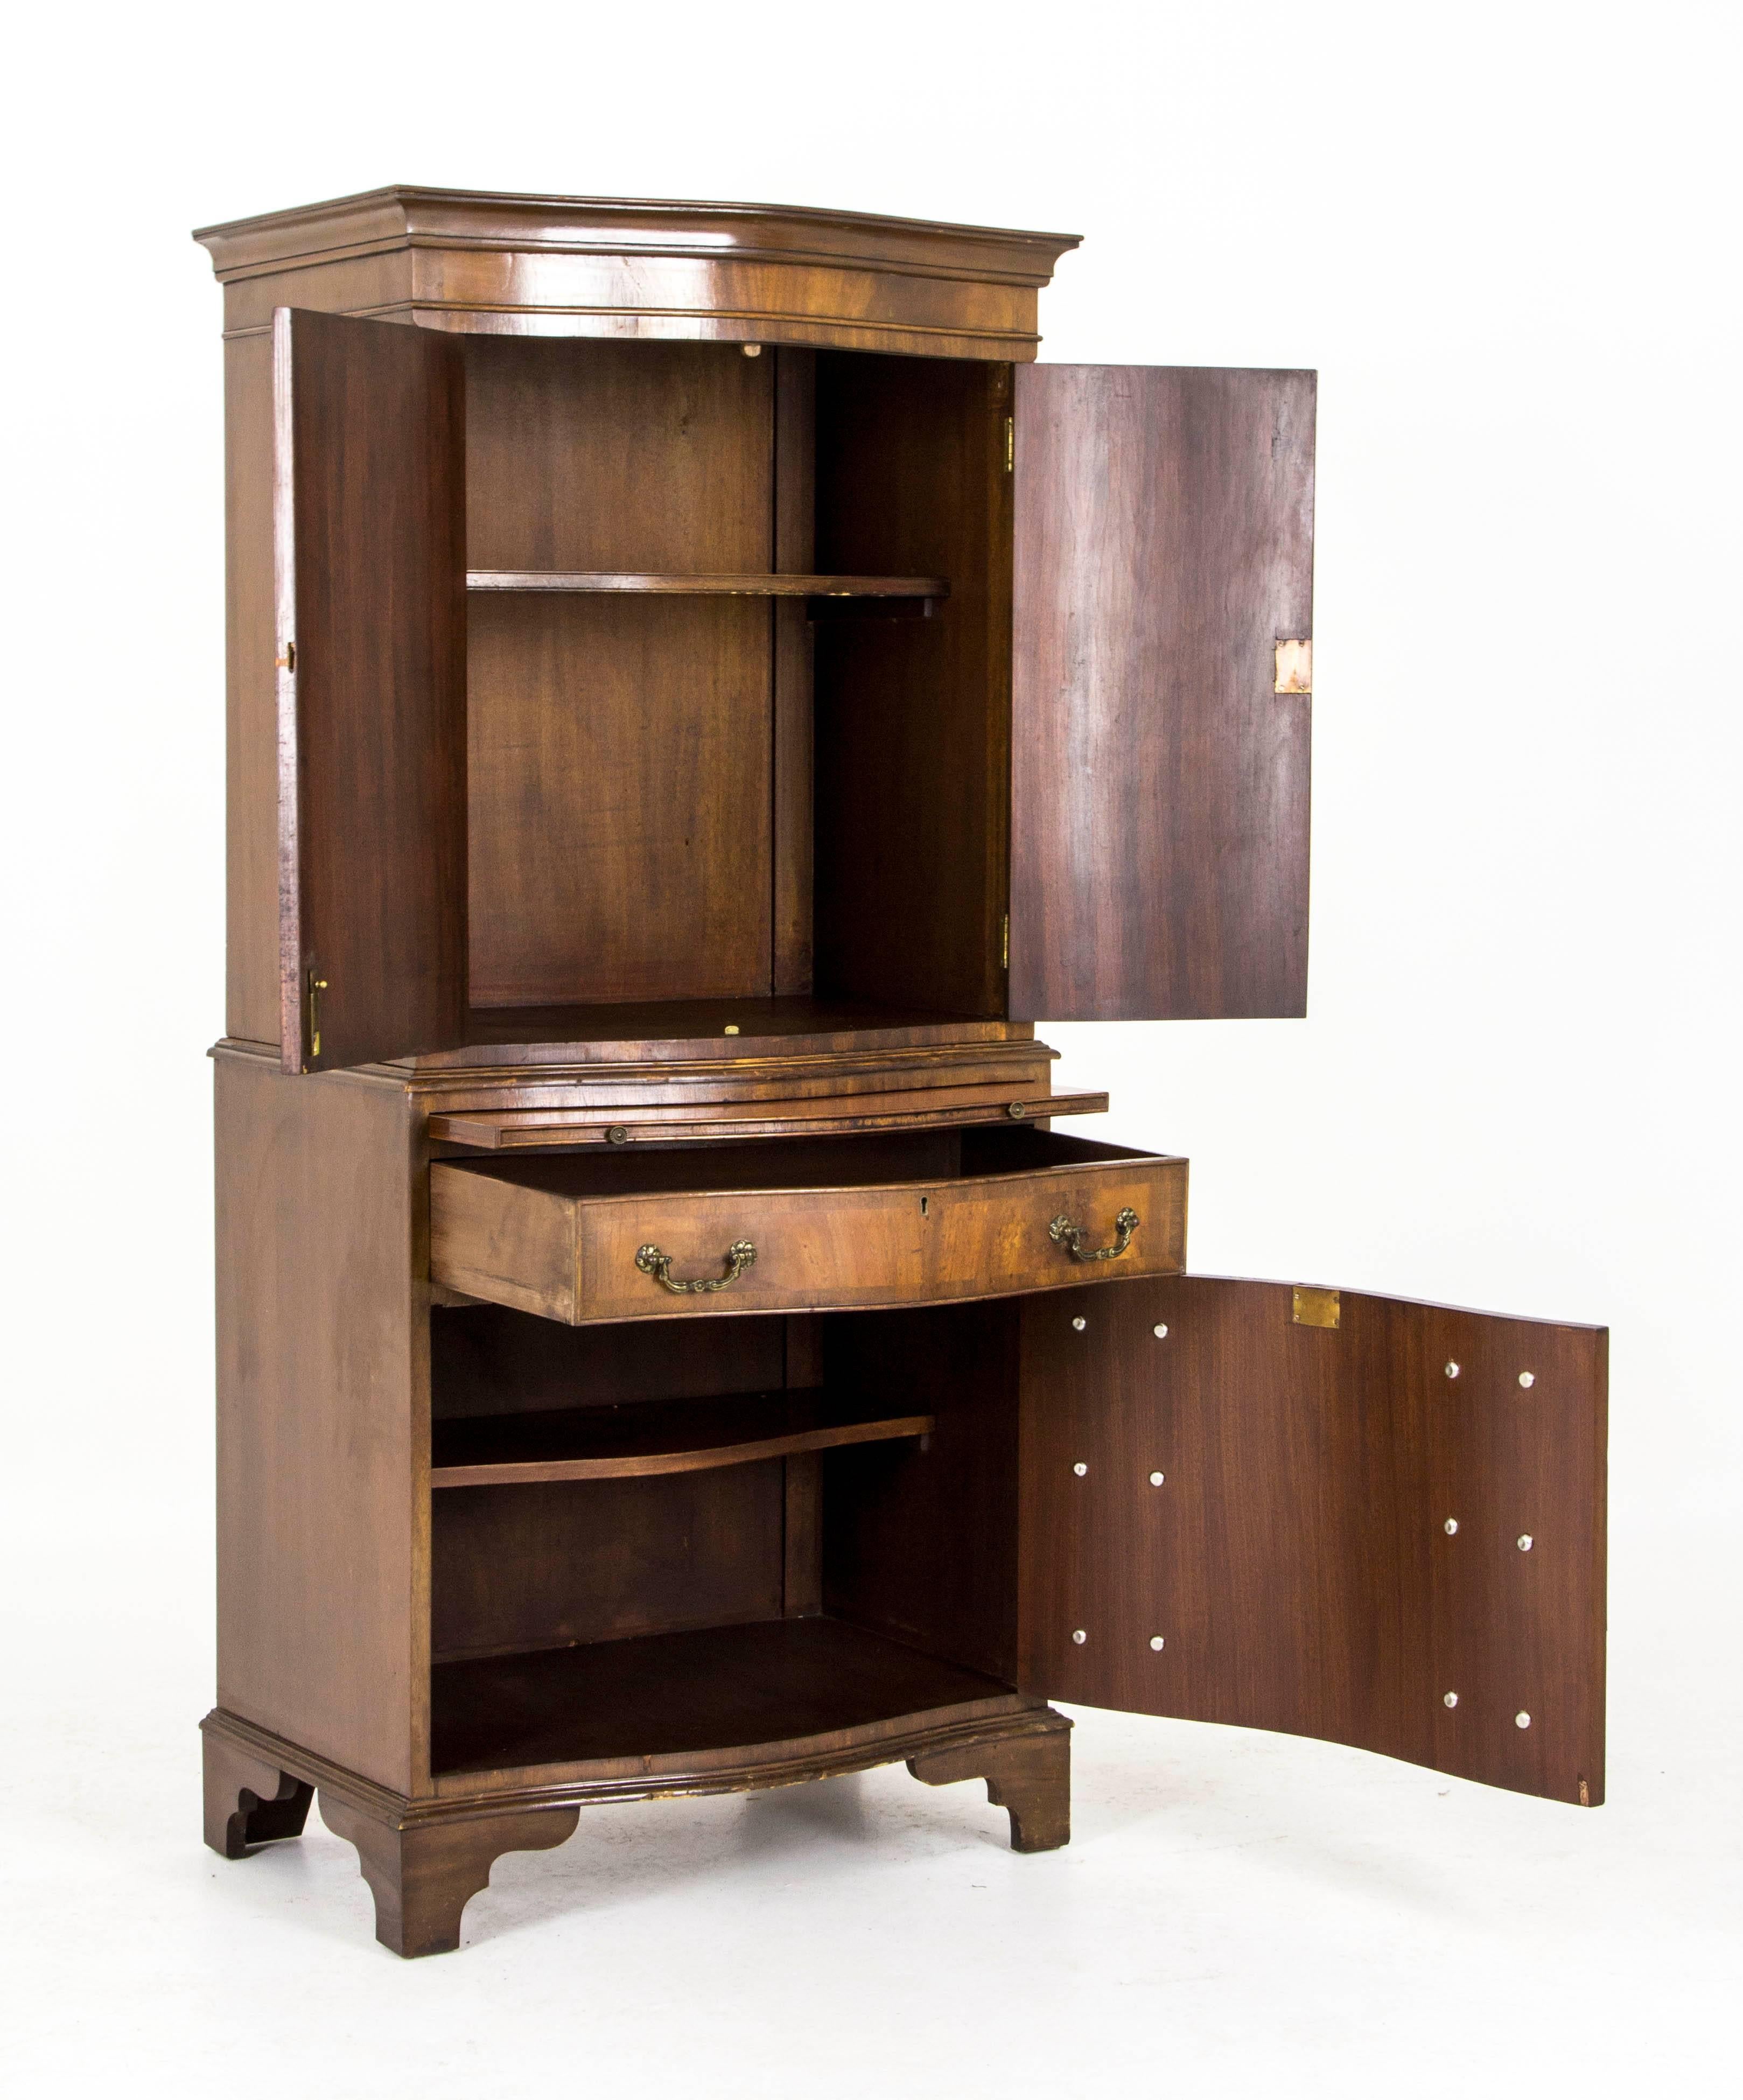 Scotland
1940
Original finish
Serpentine front doors enclose single shelf
Slide out glass shelf
Single drawer below
Concealed cupboard with false drawers
Single shelf below
Ending on bracket feet
Separates into two pieces
Some minor wear on front